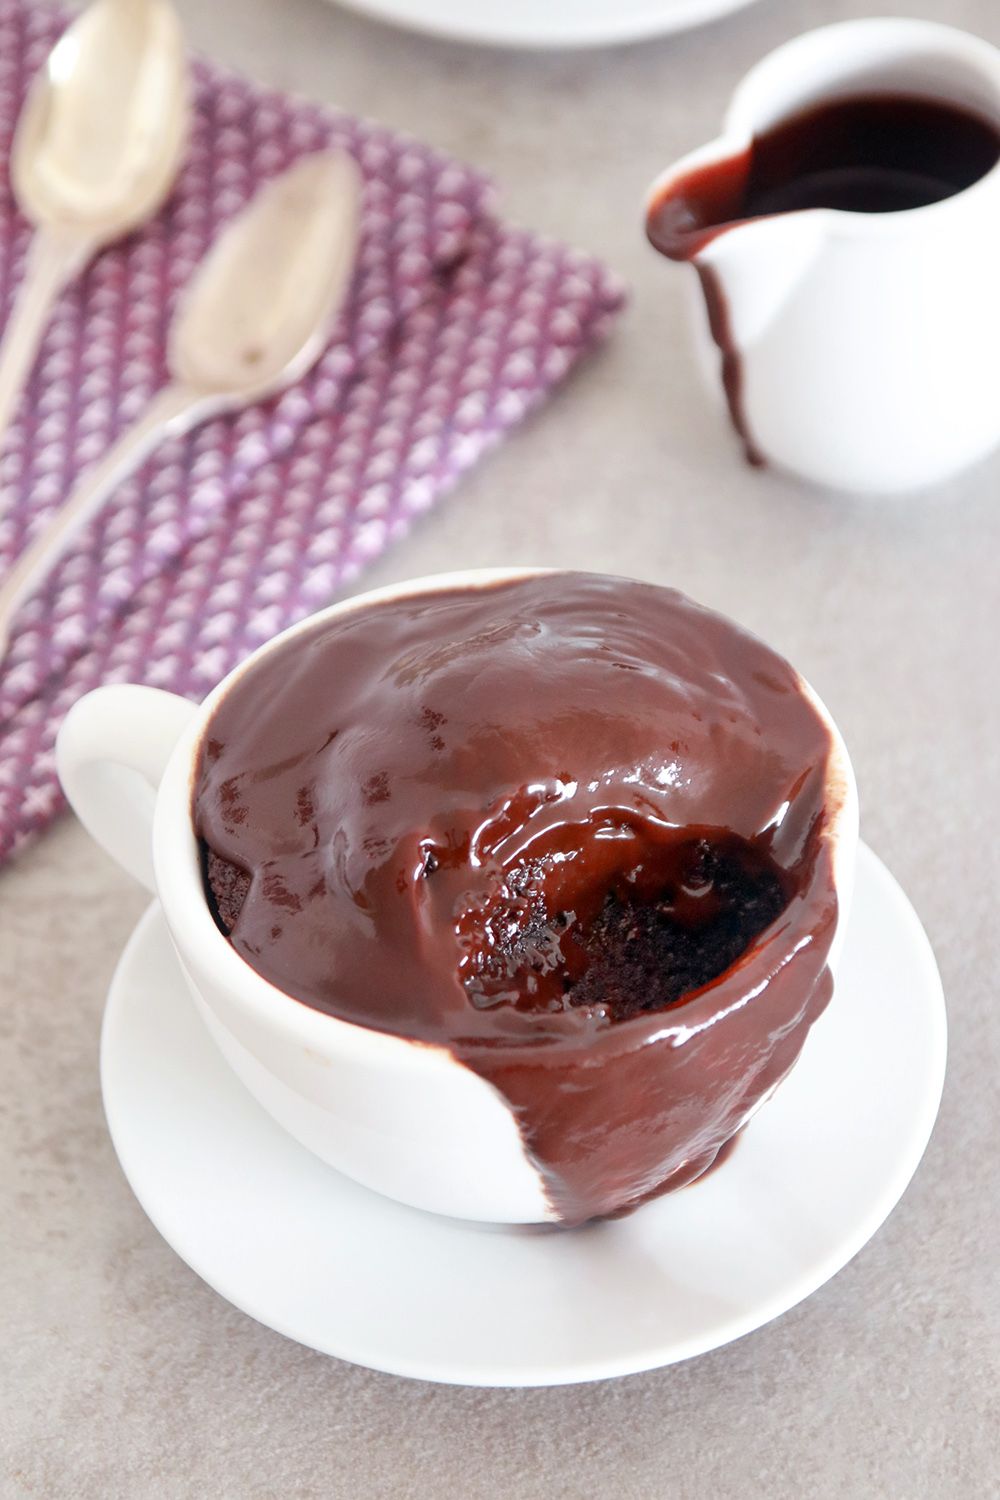 Hot Chocolate Cake in a Mug with Hot Chocolate Sauce | Photo: Natalie Levin